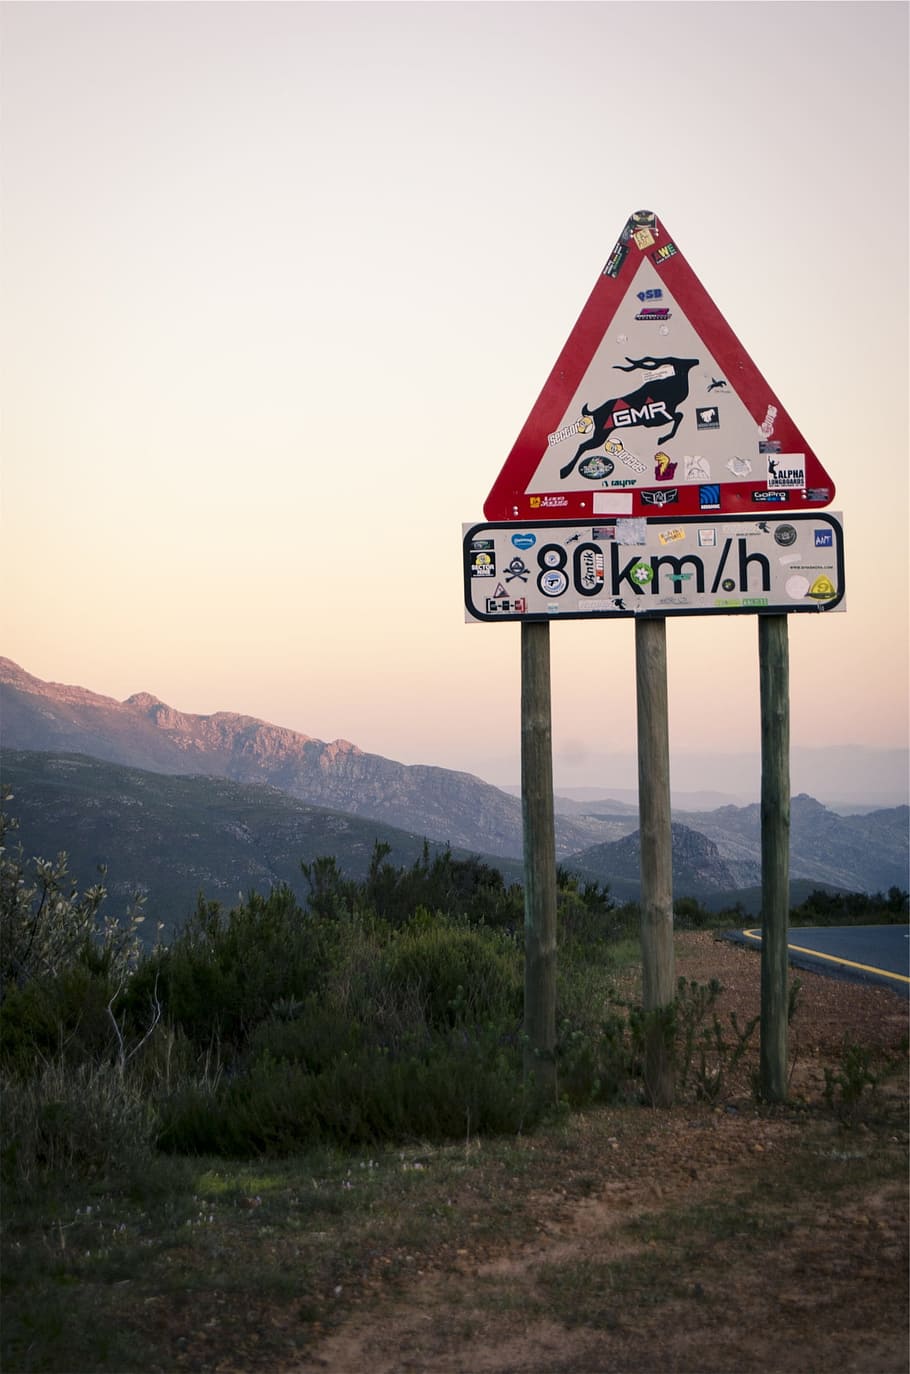 road, signs, yield, deer, speed limit, mountains, communication, sign, text, sky